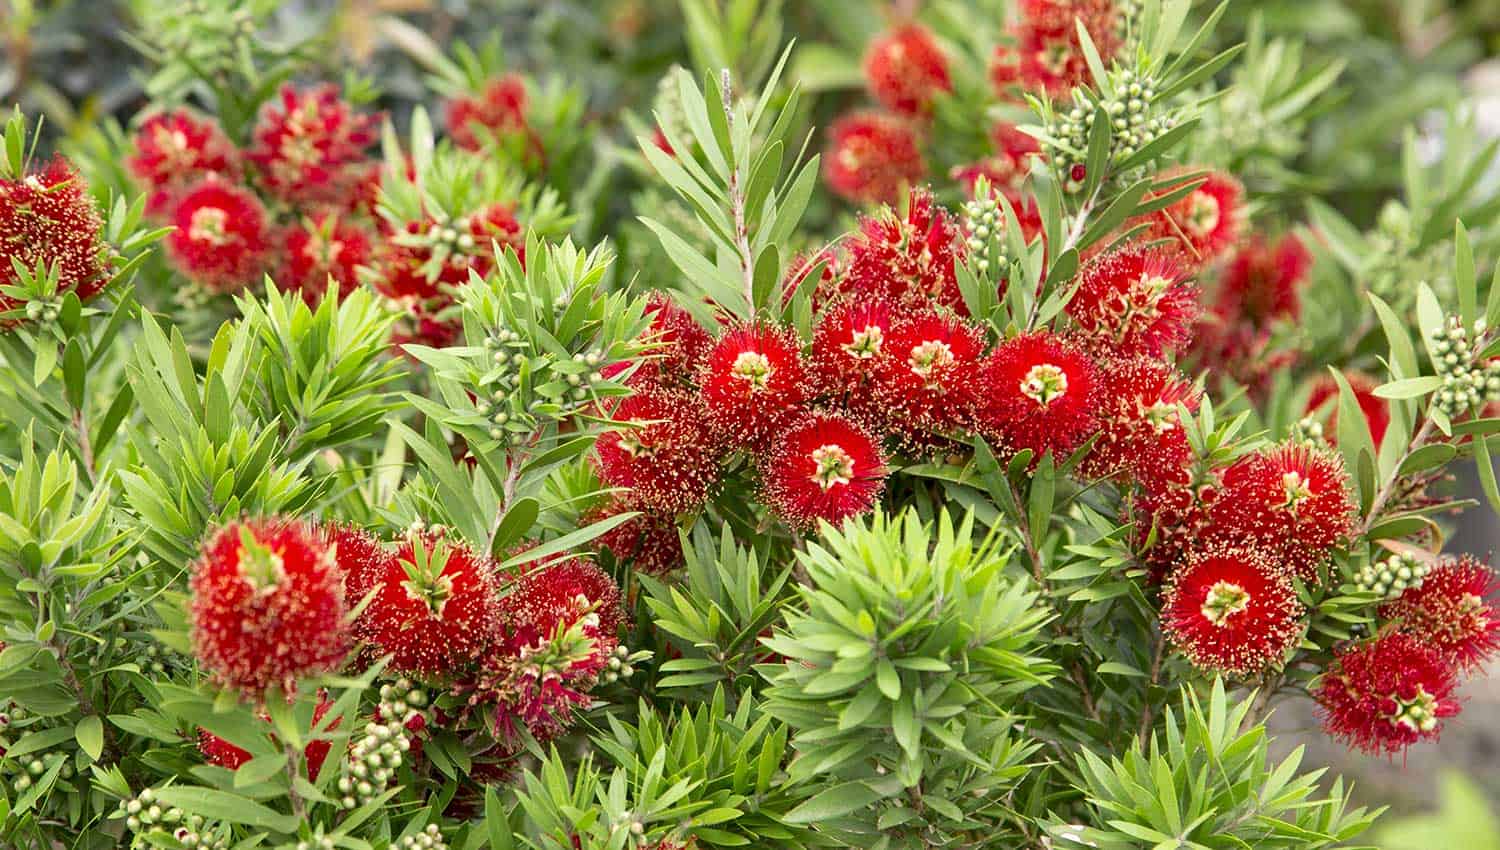 Unique and bright red botttle-brush shaped flowers of Light Show Bottlebrush from Southern Living